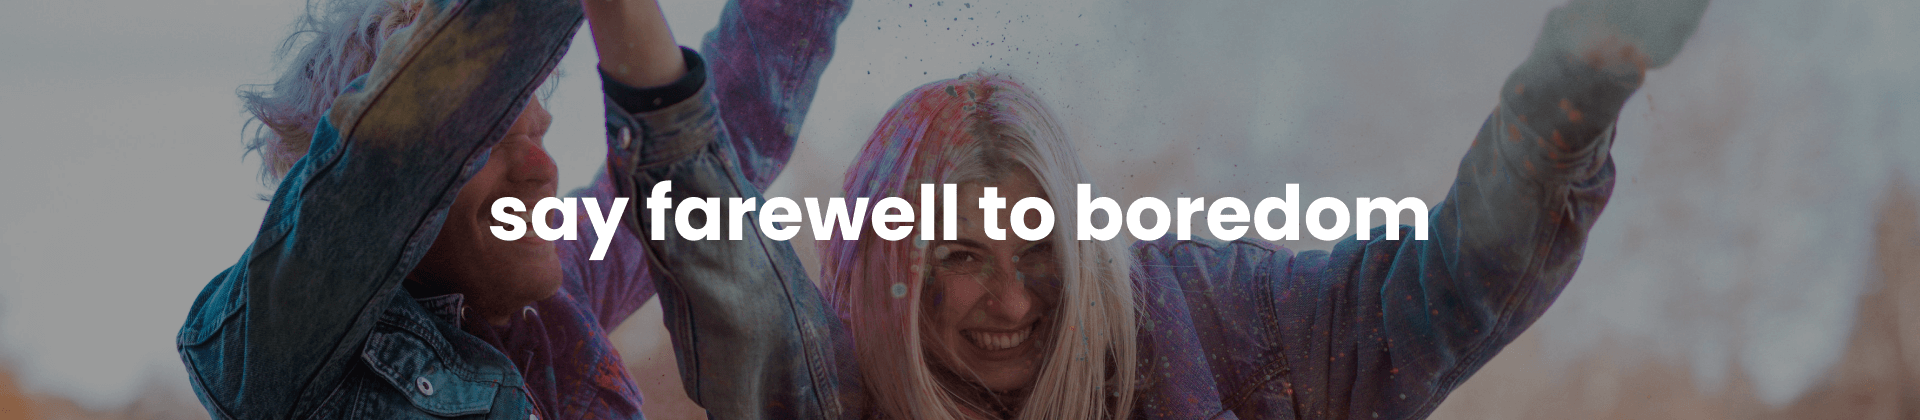 say farewell to boredom | Dating, Friends and Solo Editions by The Adventure Challenge